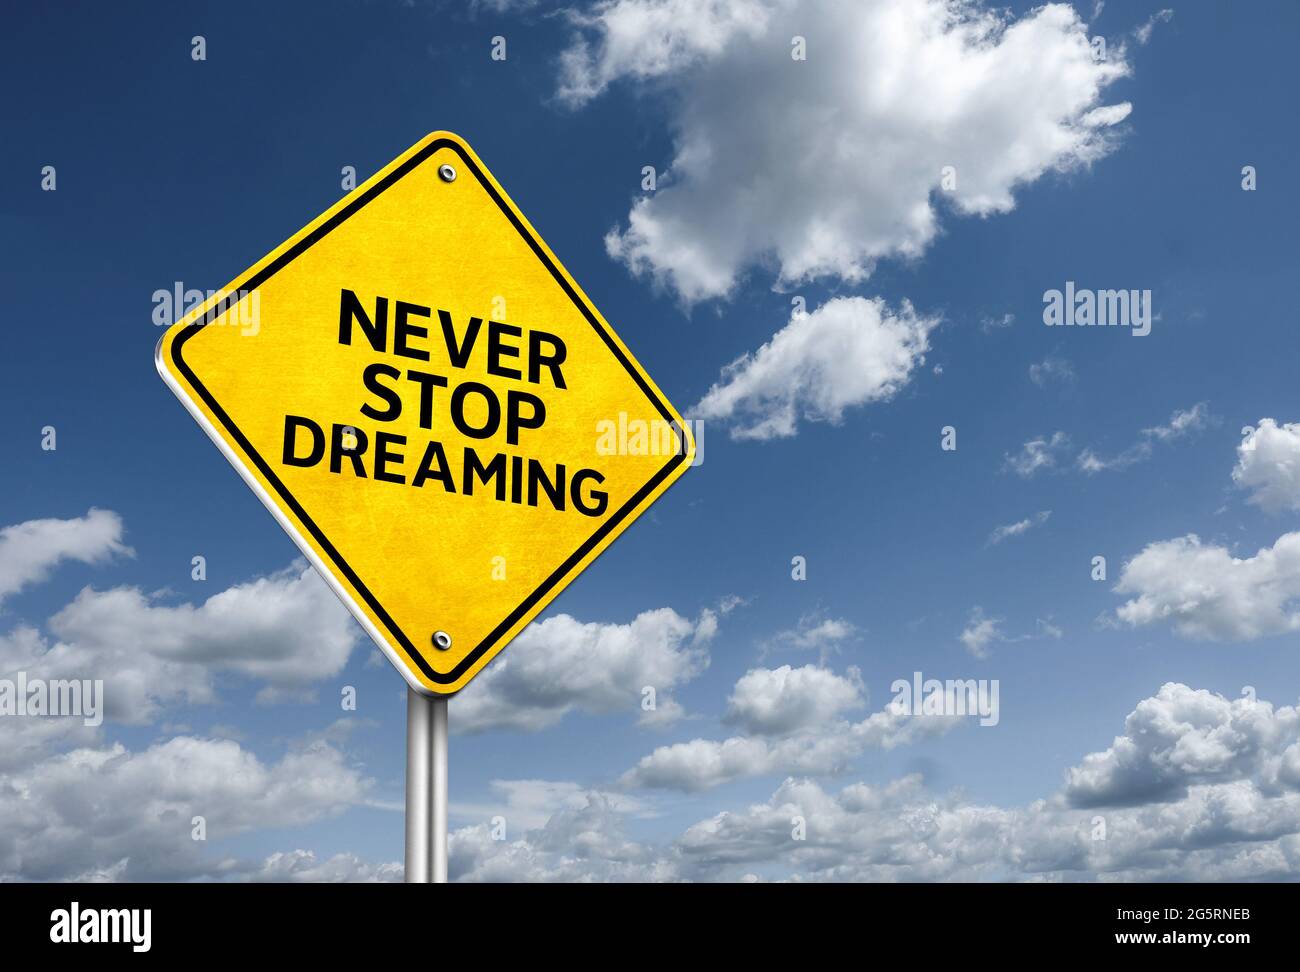 Never stop dreaming - moitivational message Stock Photo